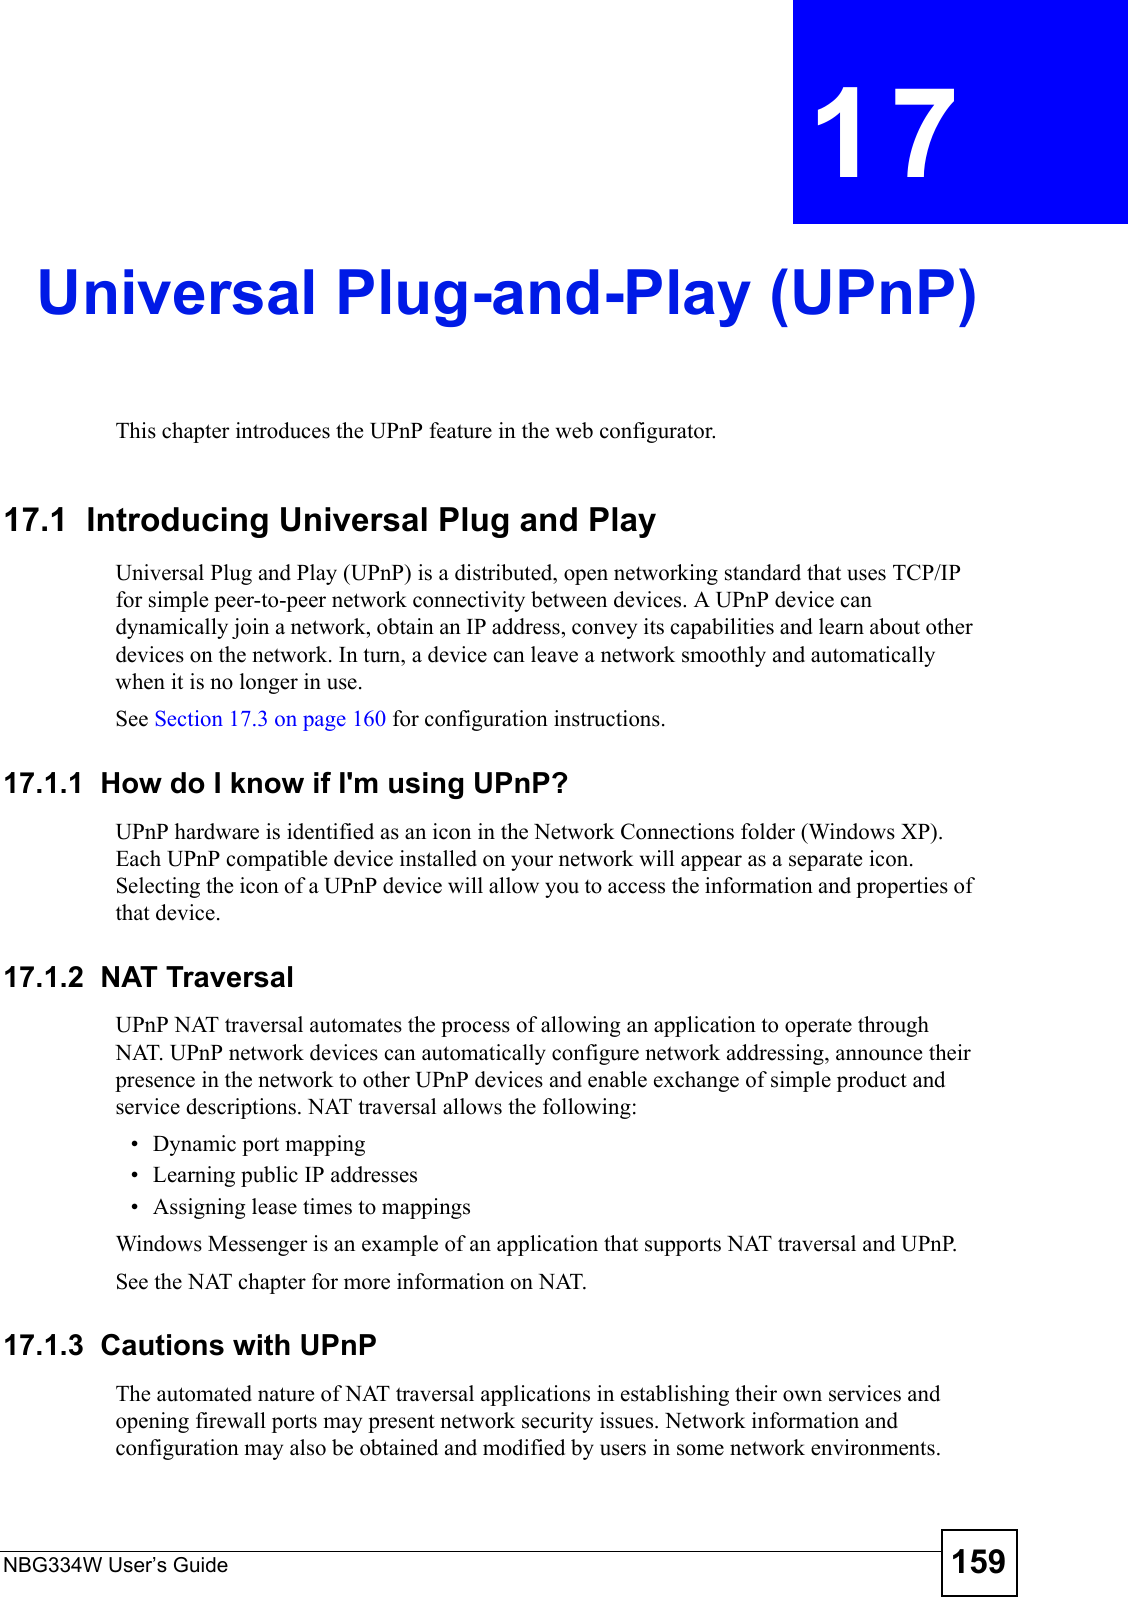 NBG334W User’s Guide 159CHAPTER  17 Universal Plug-and-Play (UPnP)This chapter introduces the UPnP feature in the web configurator.17.1  Introducing Universal Plug and Play Universal Plug and Play (UPnP) is a distributed, open networking standard that uses TCP/IP for simple peer-to-peer network connectivity between devices. A UPnP device can dynamically join a network, obtain an IP address, convey its capabilities and learn about other devices on the network. In turn, a device can leave a network smoothly and automatically when it is no longer in use.See Section 17.3 on page 160 for configuration instructions. 17.1.1  How do I know if I&apos;m using UPnP? UPnP hardware is identified as an icon in the Network Connections folder (Windows XP). Each UPnP compatible device installed on your network will appear as a separate icon. Selecting the icon of a UPnP device will allow you to access the information and properties of that device. 17.1.2  NAT TraversalUPnP NAT traversal automates the process of allowing an application to operate through NAT. UPnP network devices can automatically configure network addressing, announce their presence in the network to other UPnP devices and enable exchange of simple product and service descriptions. NAT traversal allows the following:• Dynamic port mapping• Learning public IP addresses• Assigning lease times to mappingsWindows Messenger is an example of an application that supports NAT traversal and UPnP. See the NAT chapter for more information on NAT.17.1.3  Cautions with UPnPThe automated nature of NAT traversal applications in establishing their own services and opening firewall ports may present network security issues. Network information and configuration may also be obtained and modified by users in some network environments. 